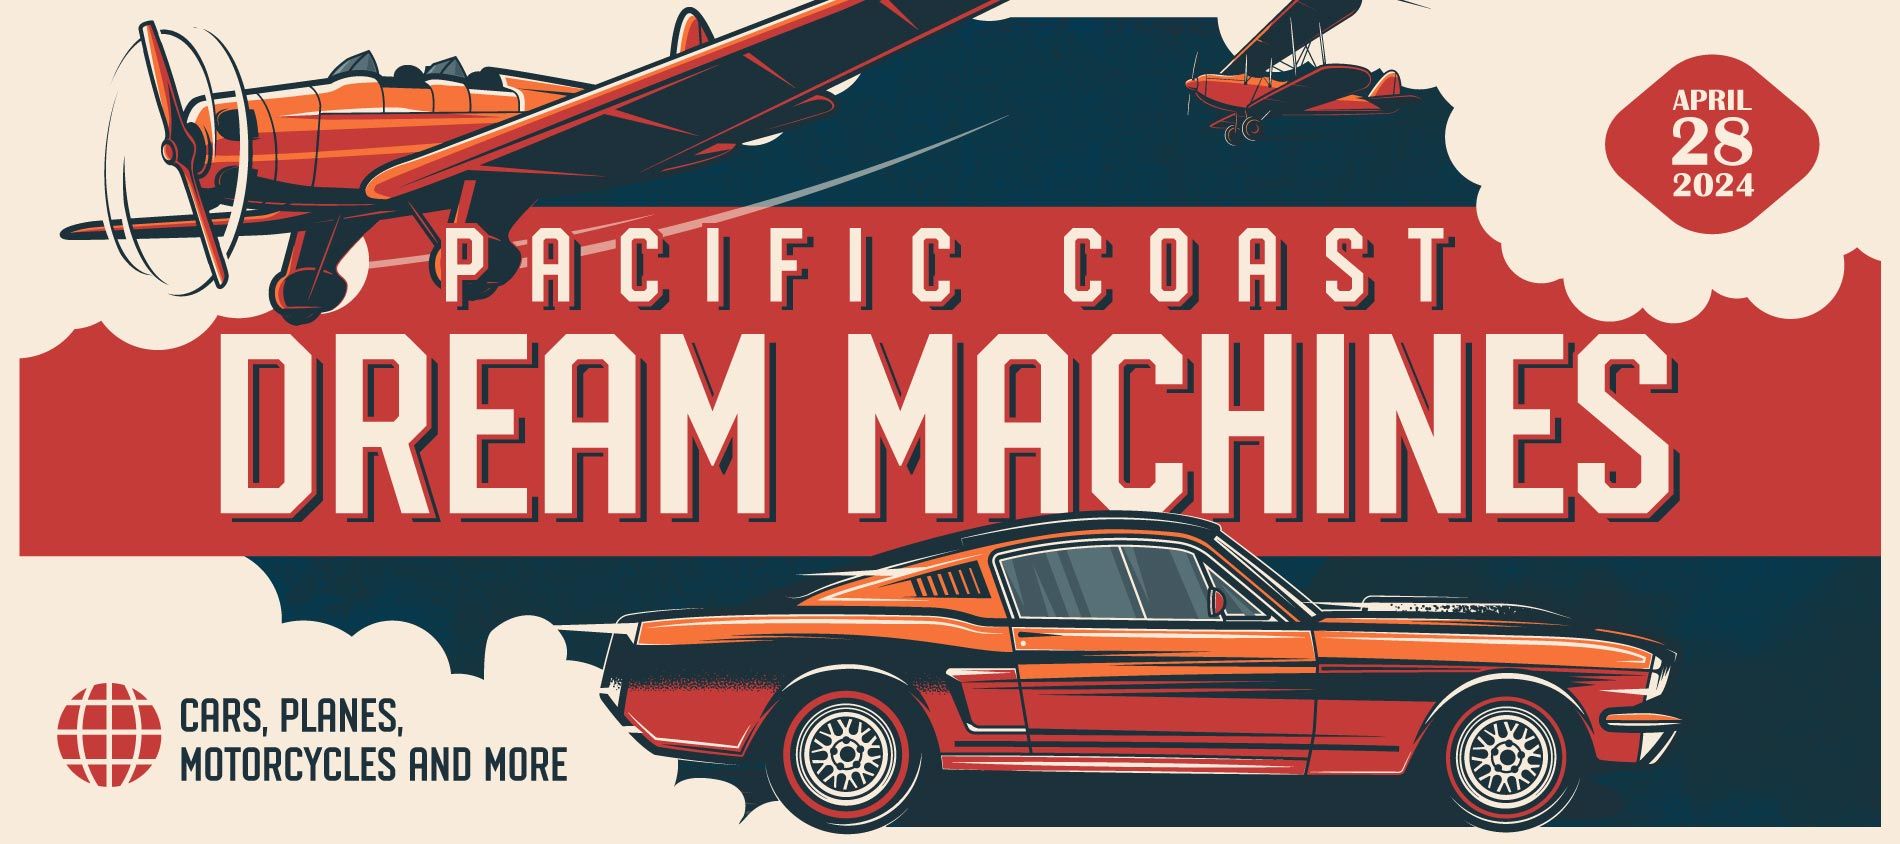 Pacific Coast Dream Machines at Half Moon Bay Airport is the coolest showcase of cars, planes, motorcycles and more